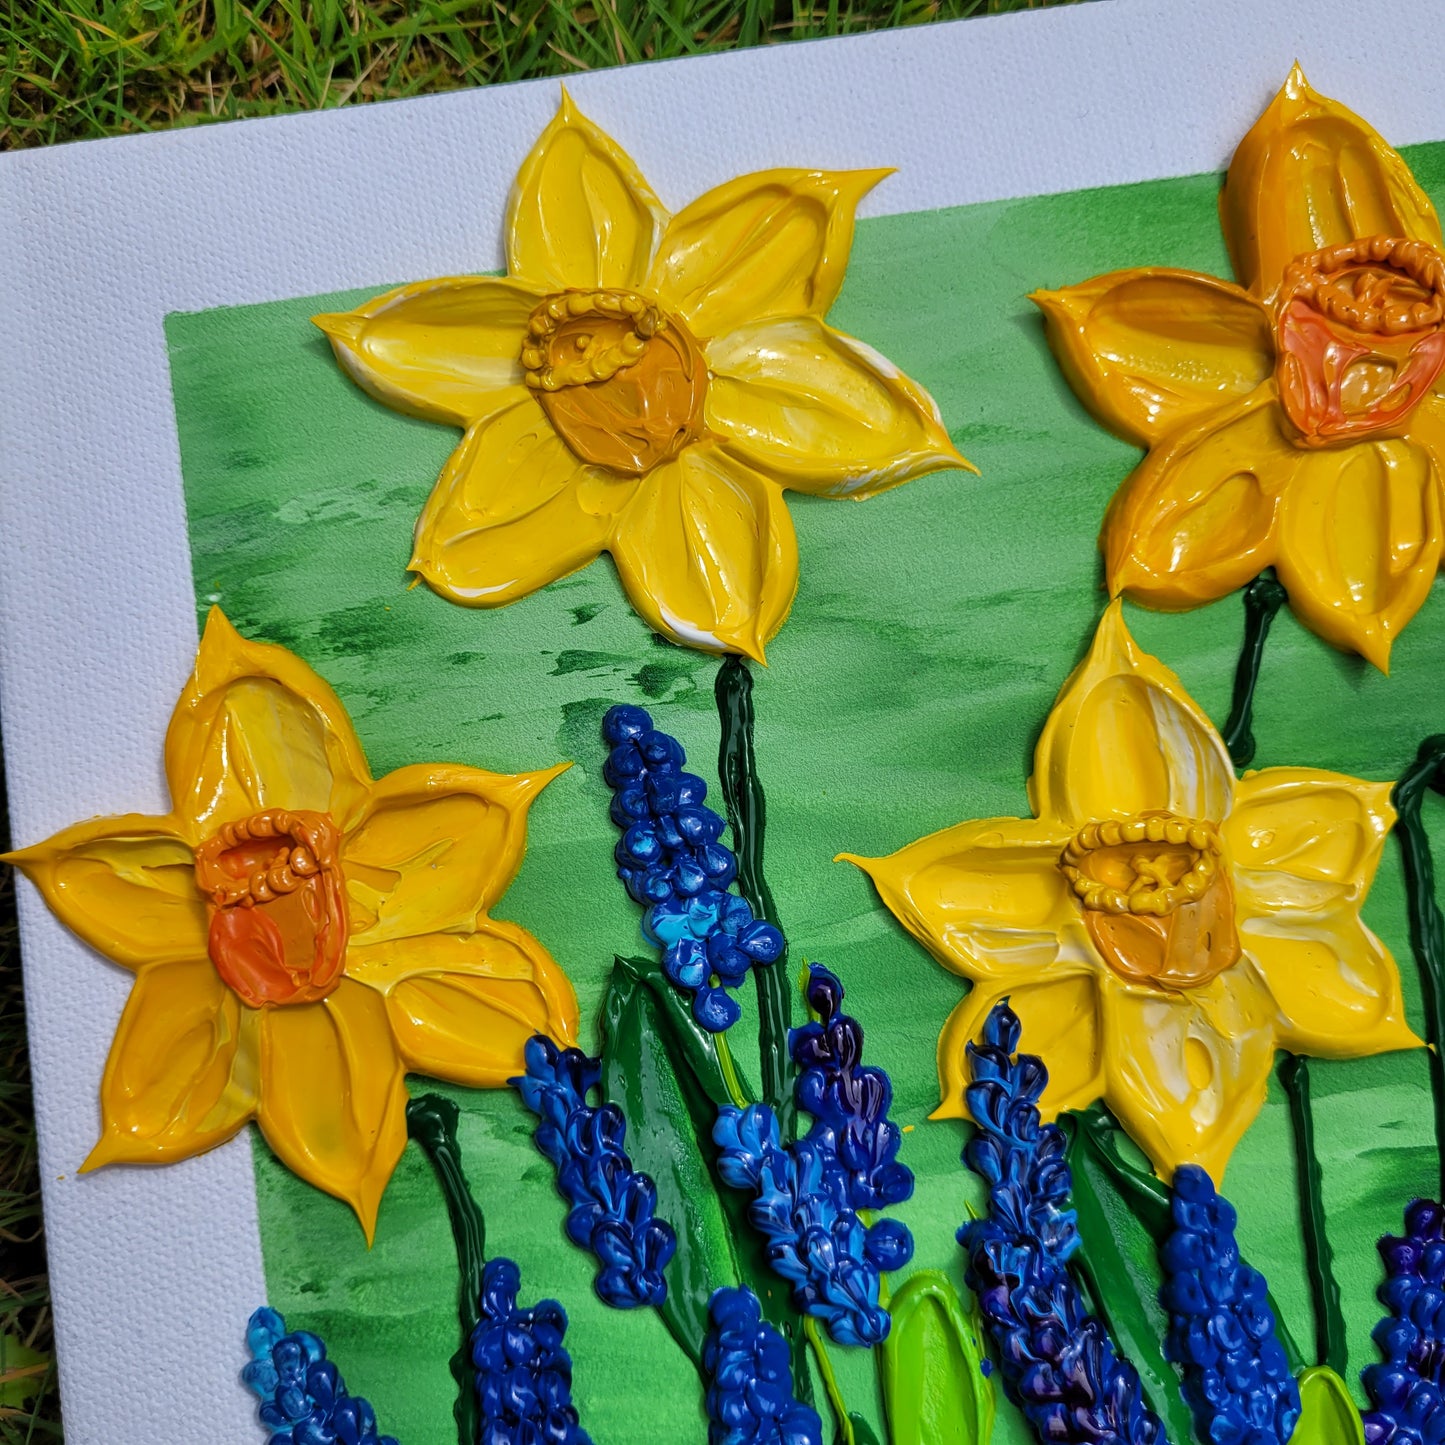 Daffodil & Grape Hyacinth Painting | 8" by 10" Stretched Canvas